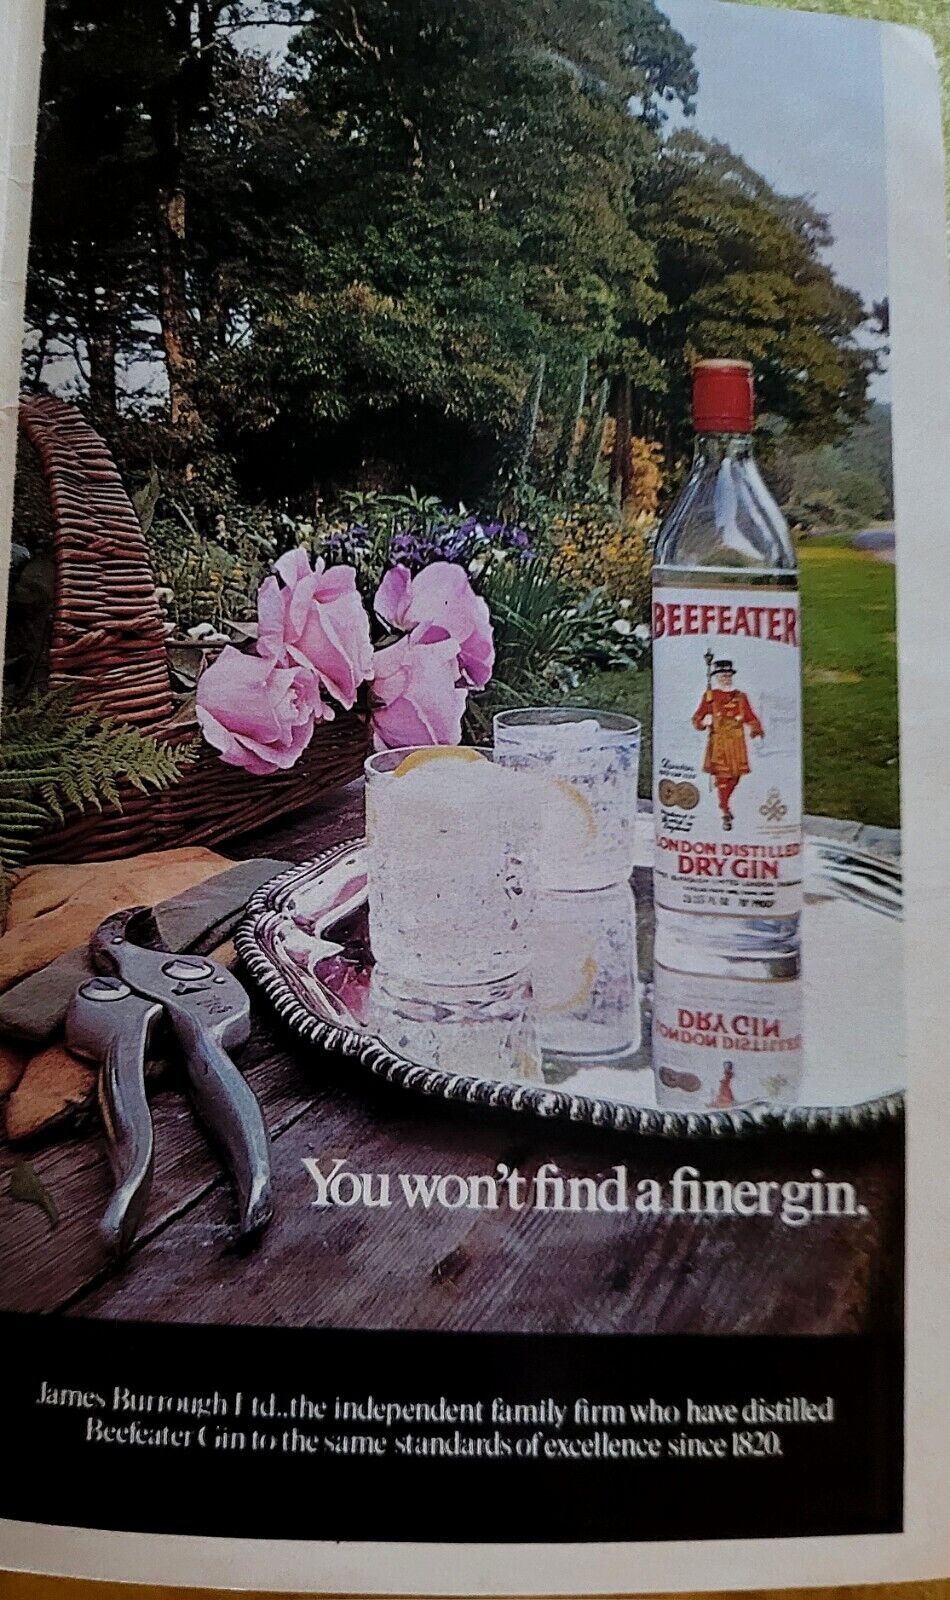 VINTAGE BEEFEATER GIN ADVERTISEMENT FROM 1978